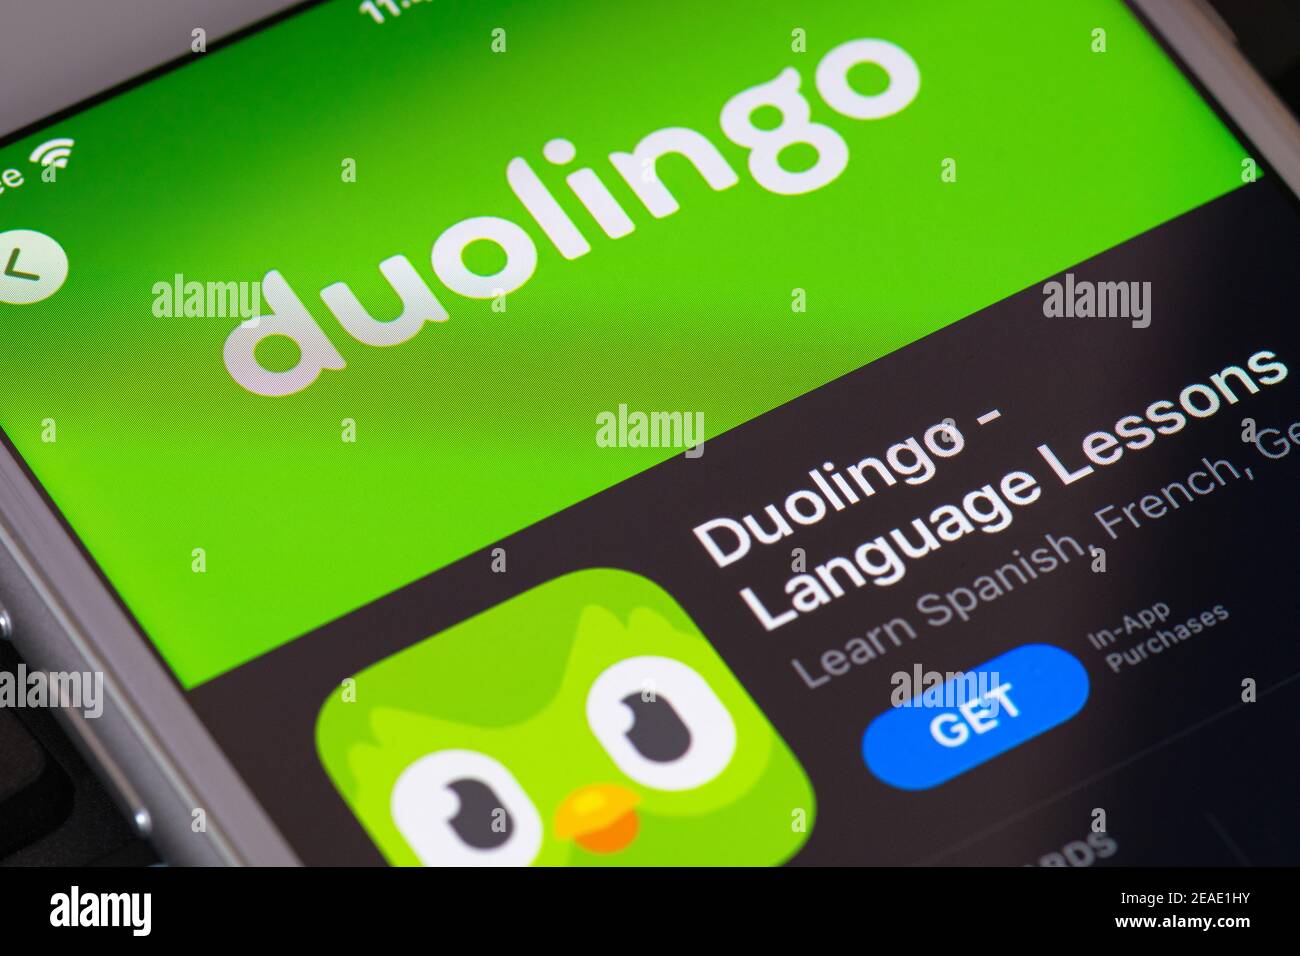 Guilherand-Granges, France - February 08, 2021. Smartphone with Duolingo logo. American language-learning website and mobile app. Stock Photo